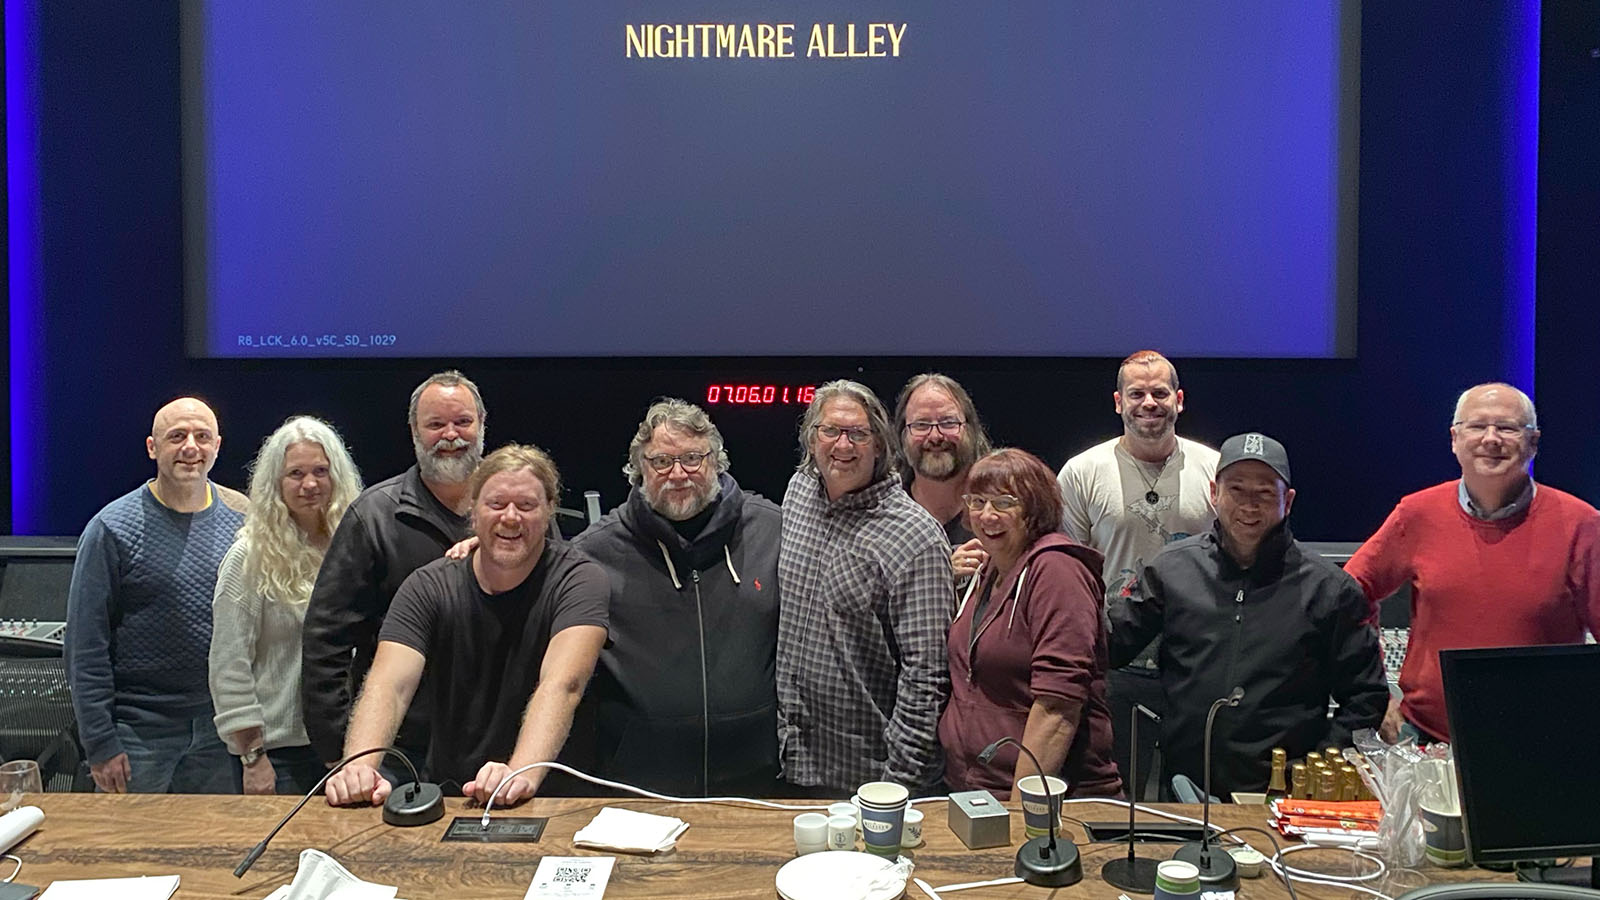 L-R: Nathan Robataille (sound designer), Jill Purdy (dialogue editor), Brad Zoern (SFX re-recording mixer), Cam McLauchlin (editor), Guillermo del Toro (director), Christian Cooke (re-recording mixer - DX and music), Kevin Banks (music editor), Mary Juric (first assistant editor), Arturo Fuenmayor (mix assistant), Miles J. Dale (producer), Doug Wilkinson (post supervisor)